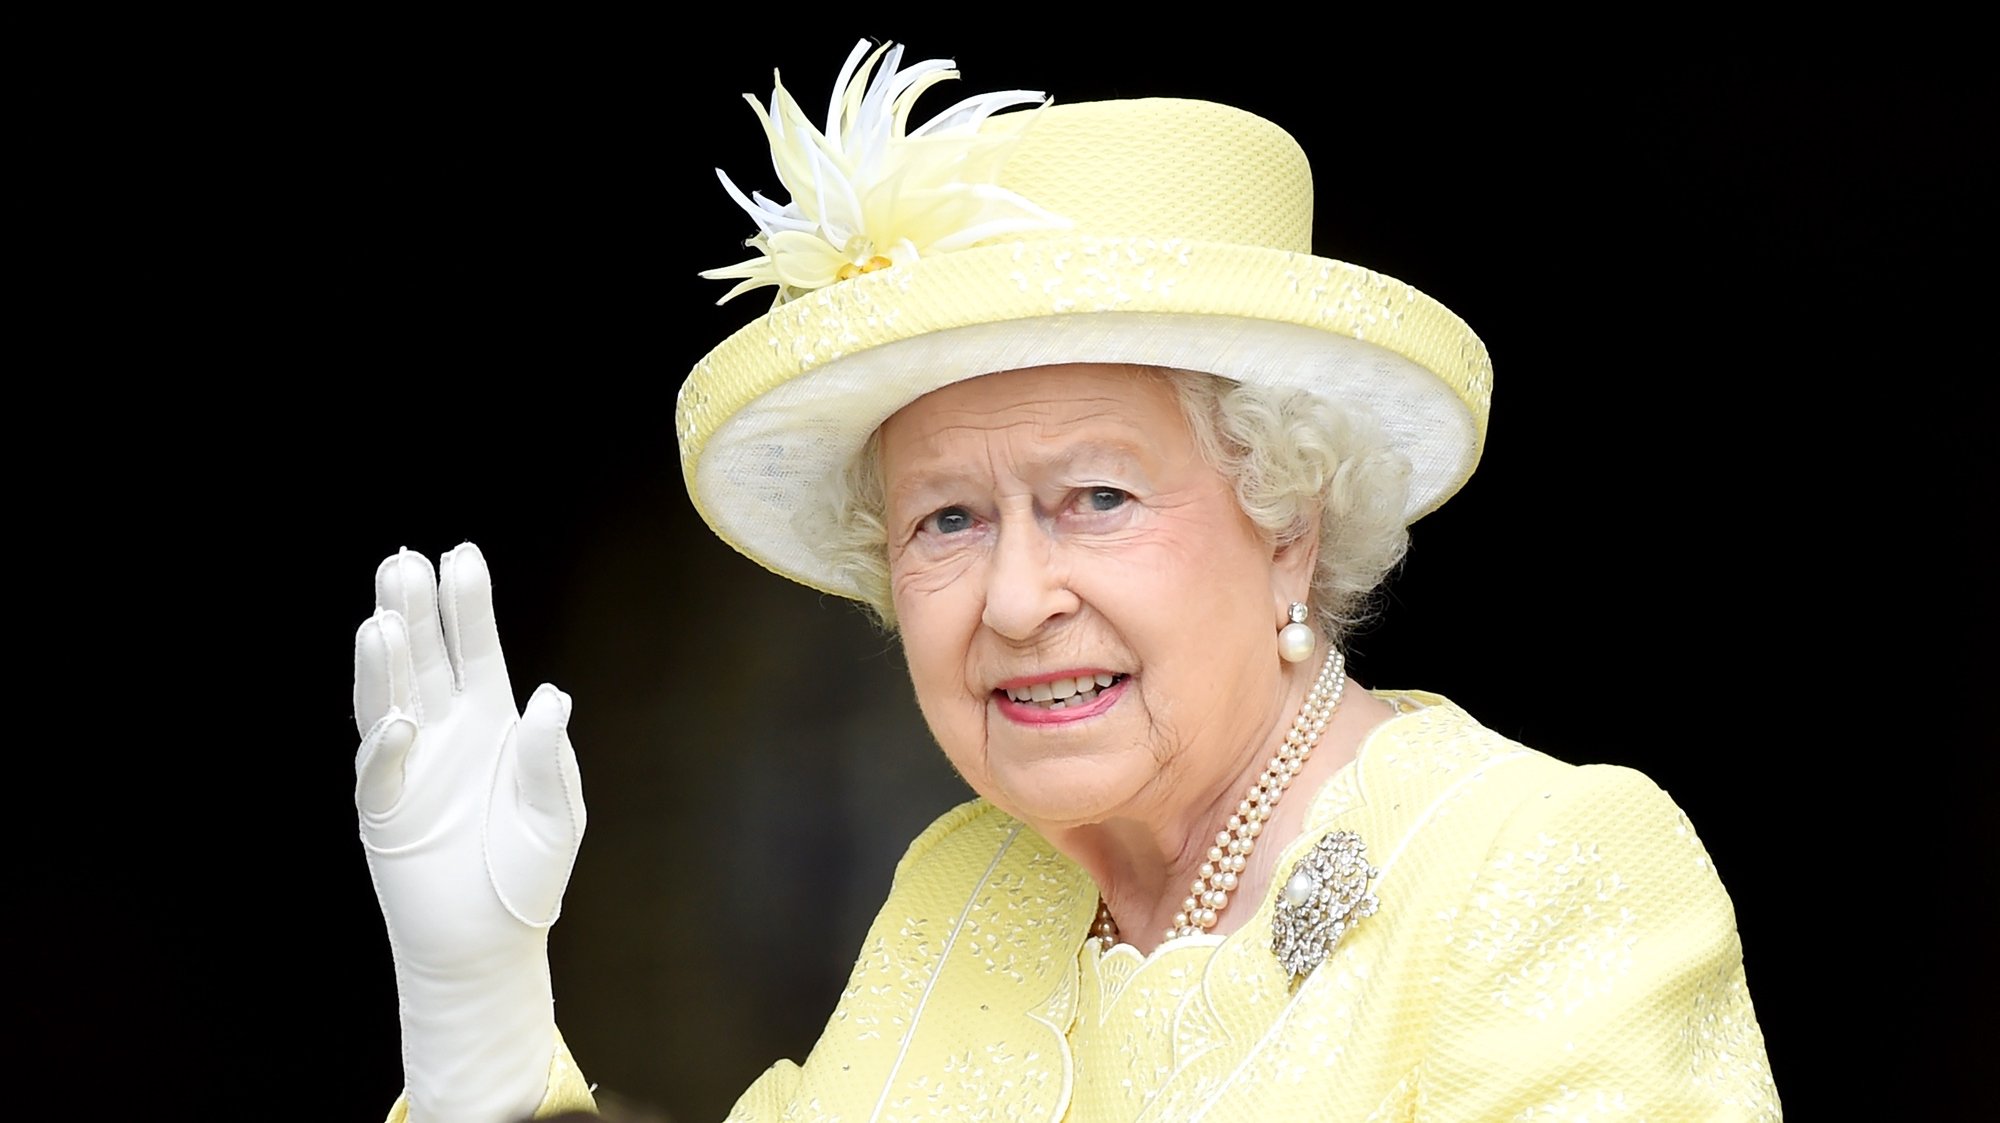 epa09774012 (FILE) - Britain&#039;s Elizabeth II waves as she arrives to St Paul&#039;s Cathedral ahead of The National Service of Thanksgiving to mark her 90th birthday in London, Britain, 10 June 2016 (reissued 20 February 2022). The Buckingham Palace on 20 February 2022 confirmed the British monarch being tested positive for Covid-19. A spokersperson of the palace was cited as saying that Her Majesty, The Queen, was &#039;experiencing mild cold-like symptoms&#039; and that &#039;she expects to continue light duties at Windsor this week.&#039;  EPA/FACUNDO ARRIZABALAGA *** Local Caption *** 52813545